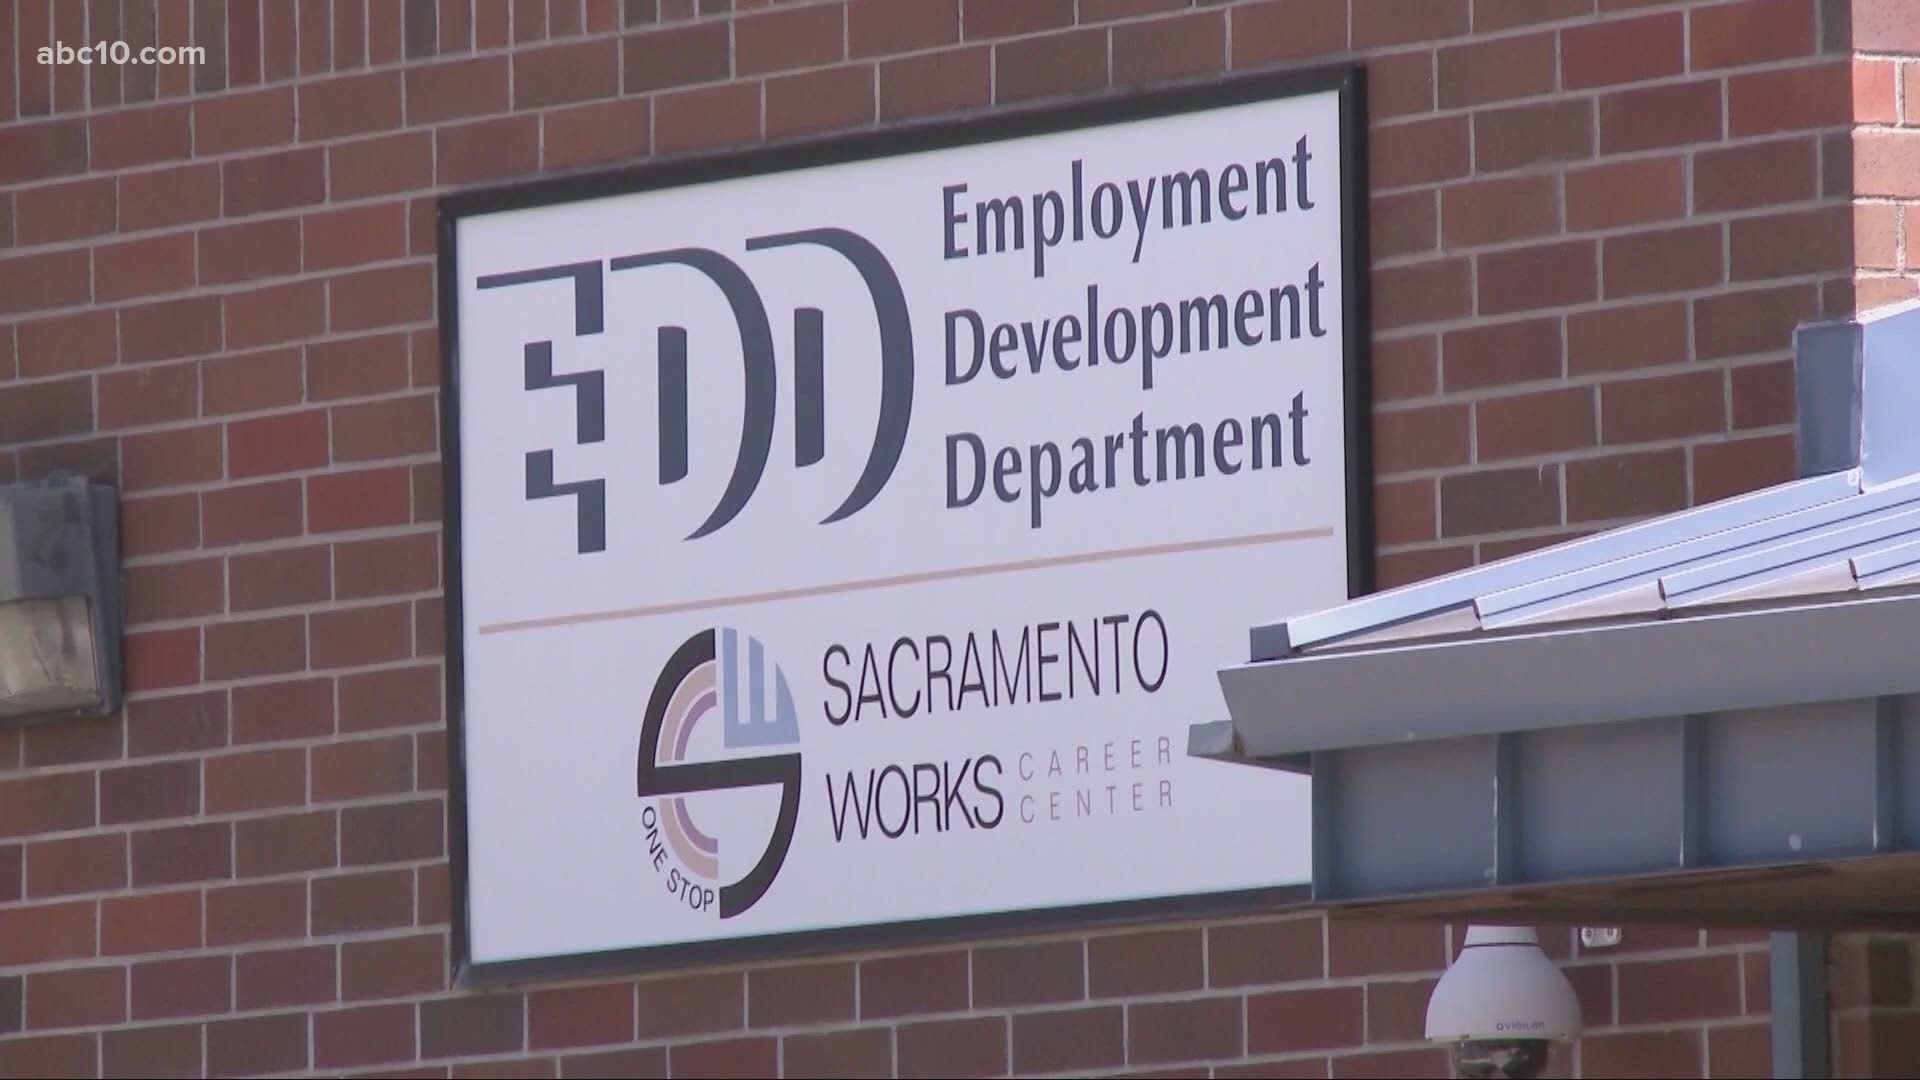 EDD says it will start issuing the $300 Lost Wages Assistance payments to unemployed people in California starting the week of September 7.